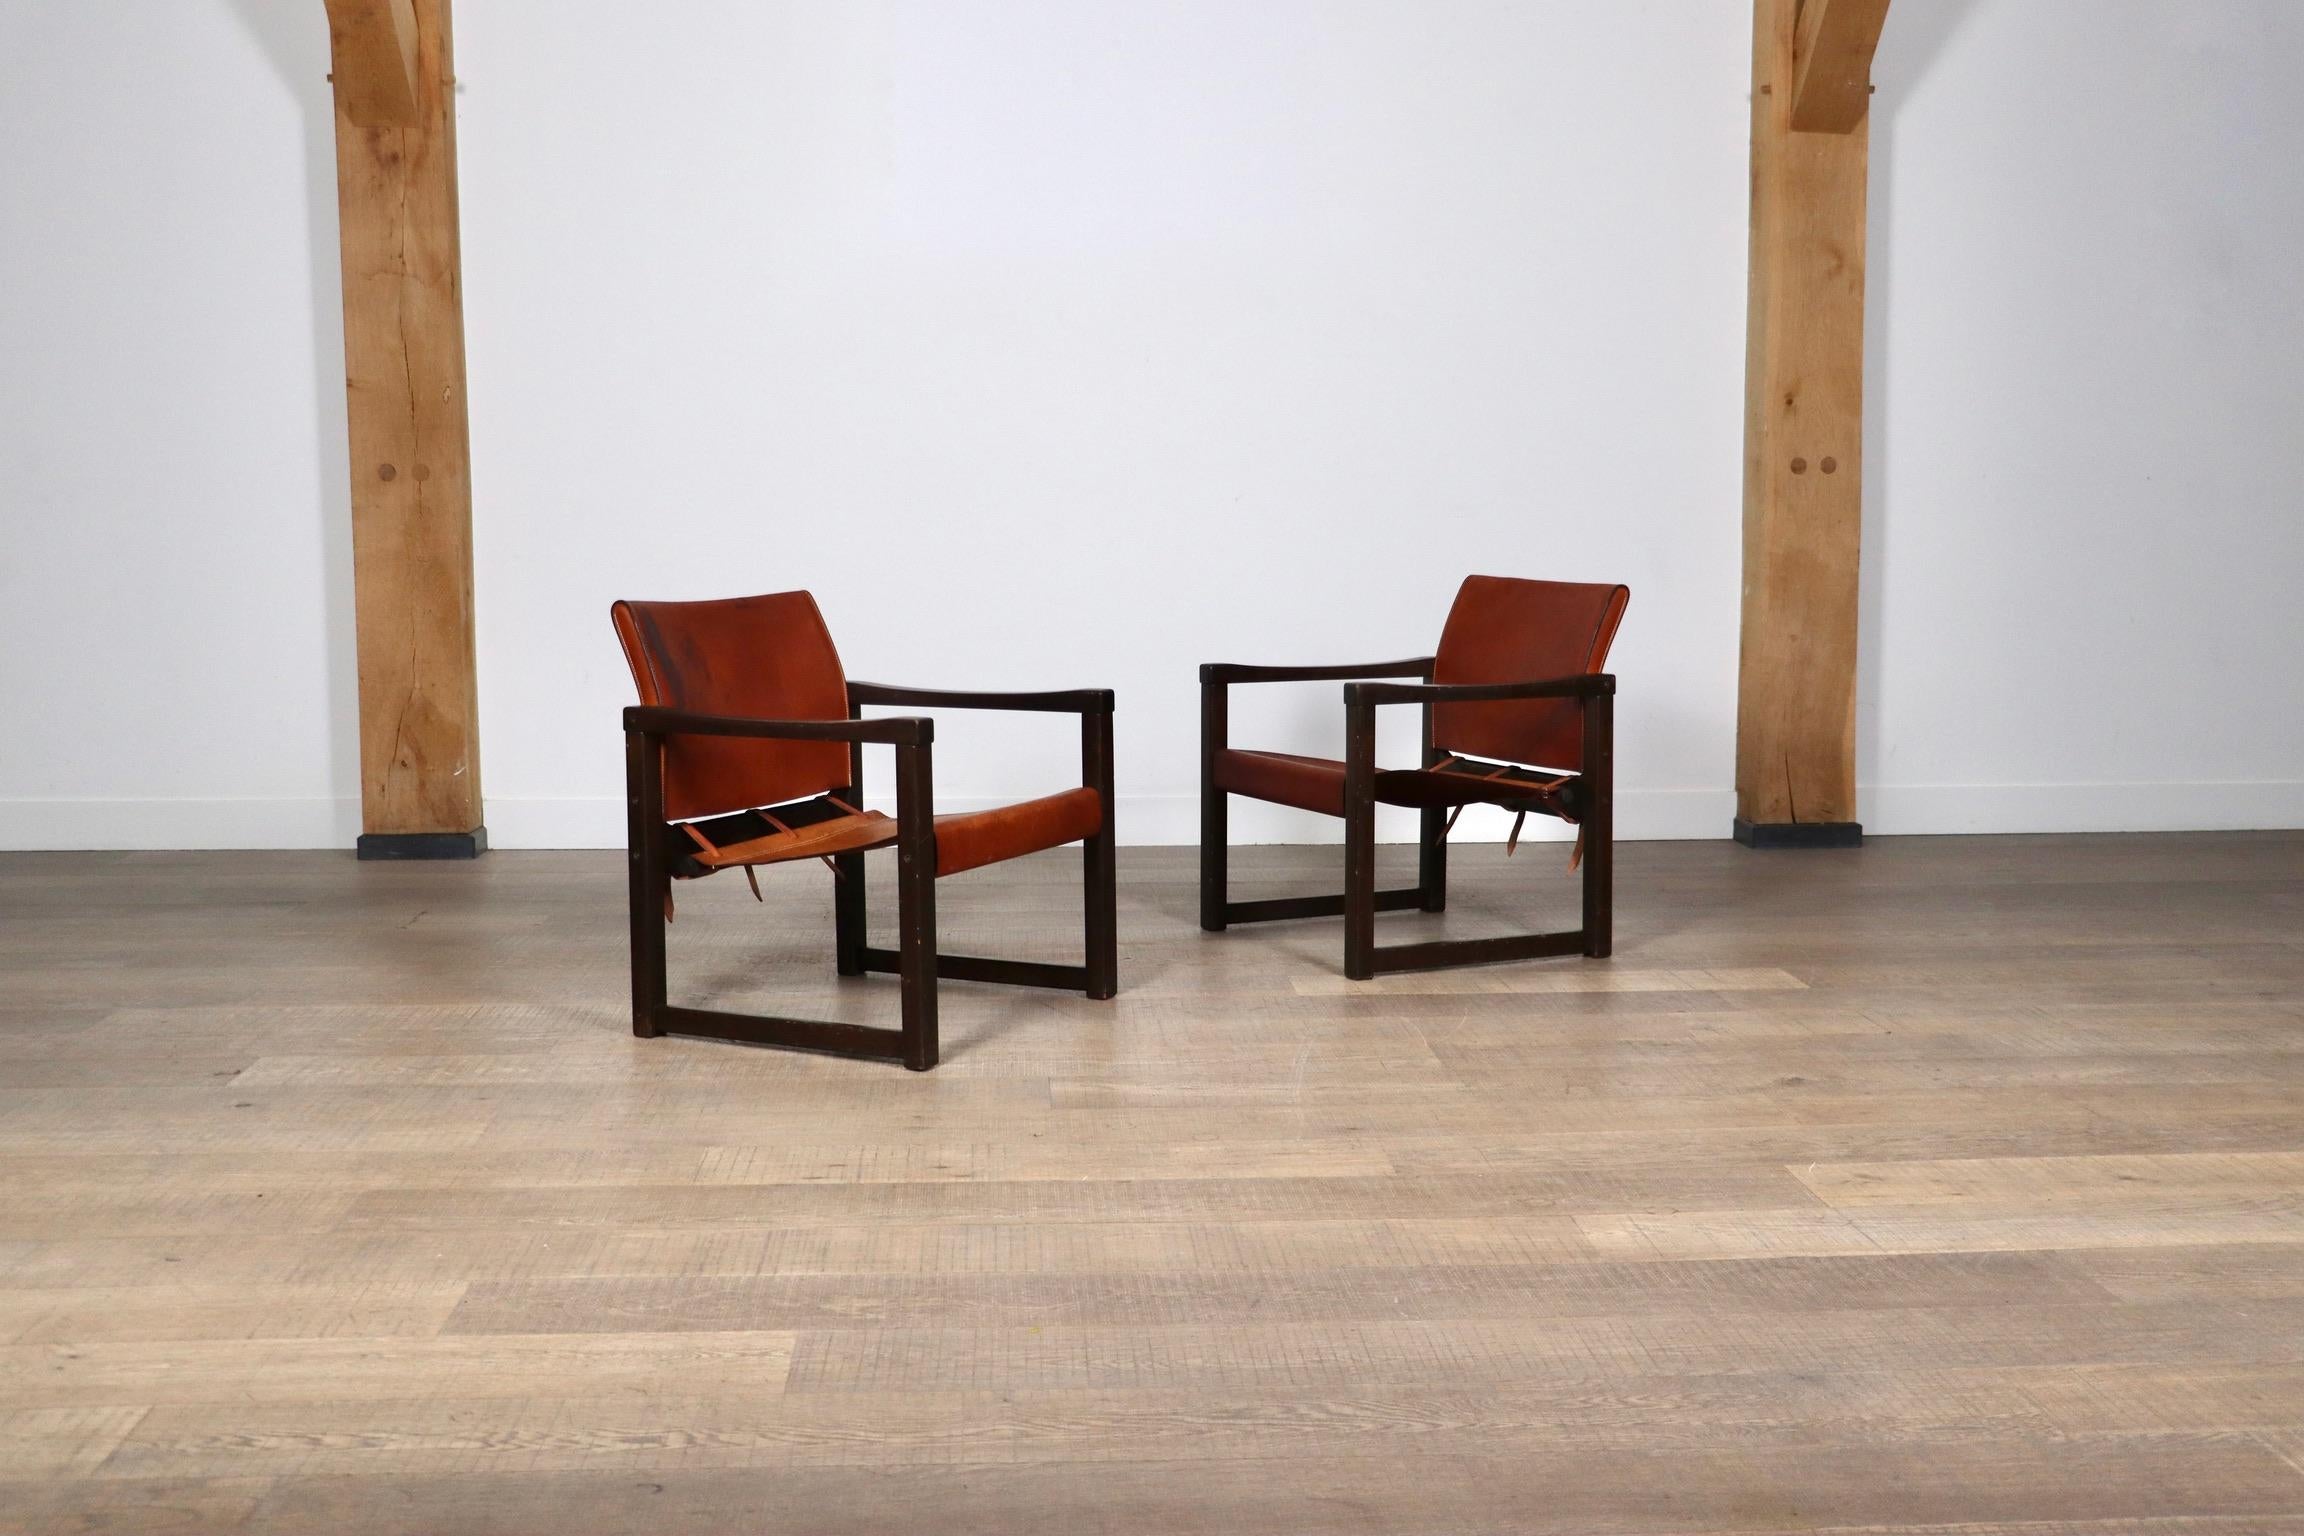 Mid-20th Century Pair Of Diana Safari Chairs By Karin Mobring In Cognac Leather For Ikea, 1970s